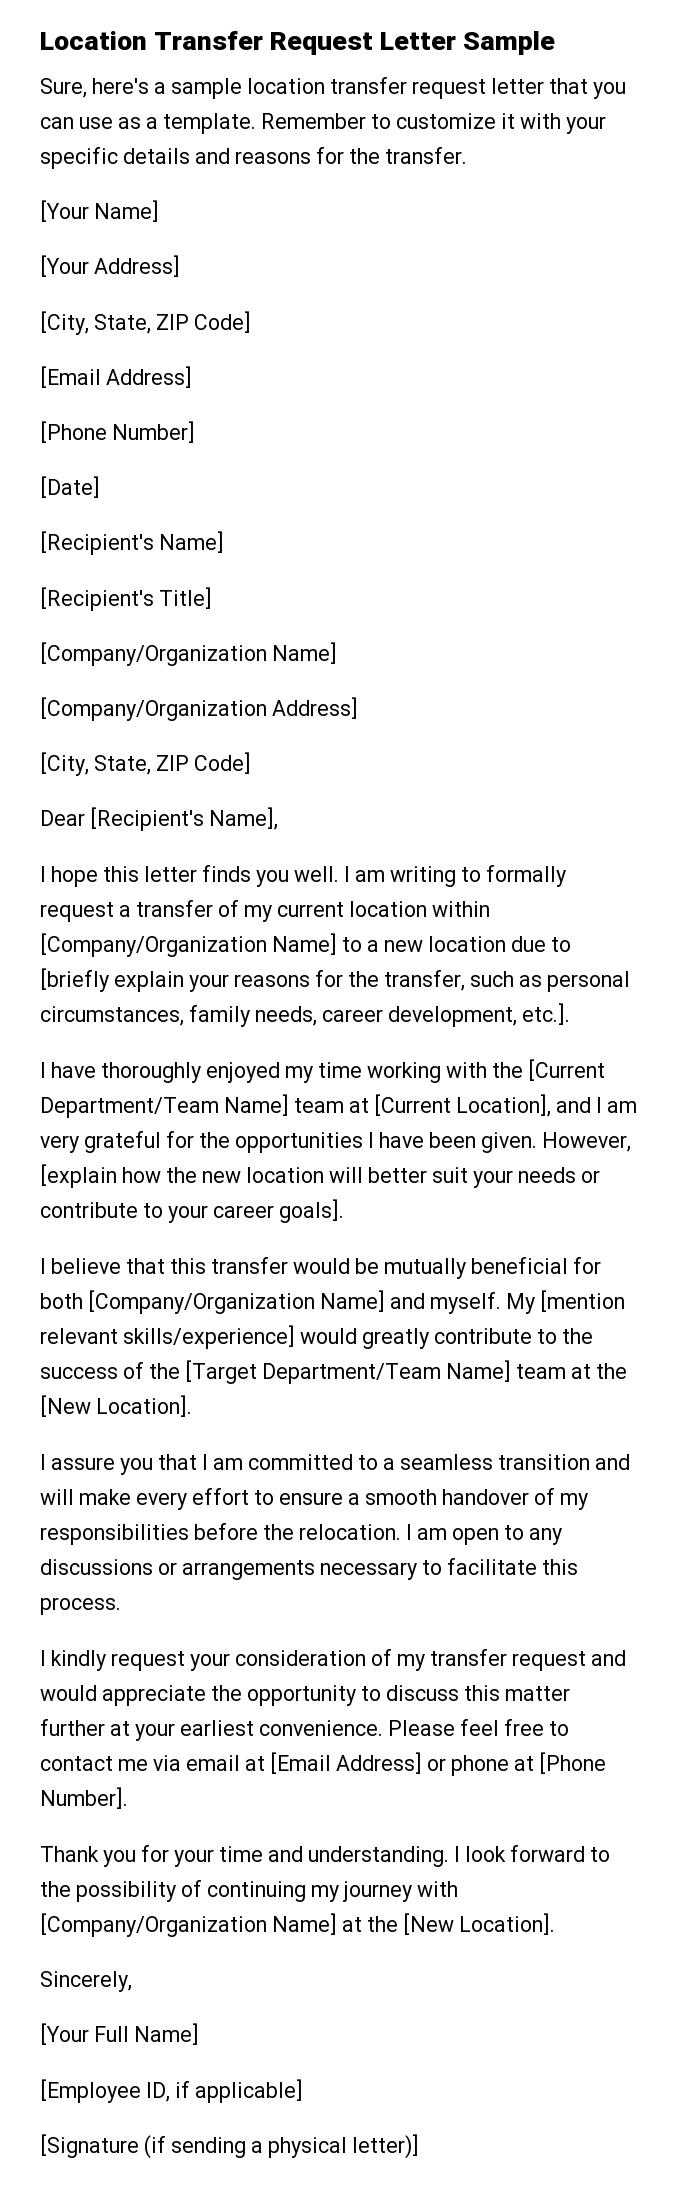 Location Transfer Request Letter Sample